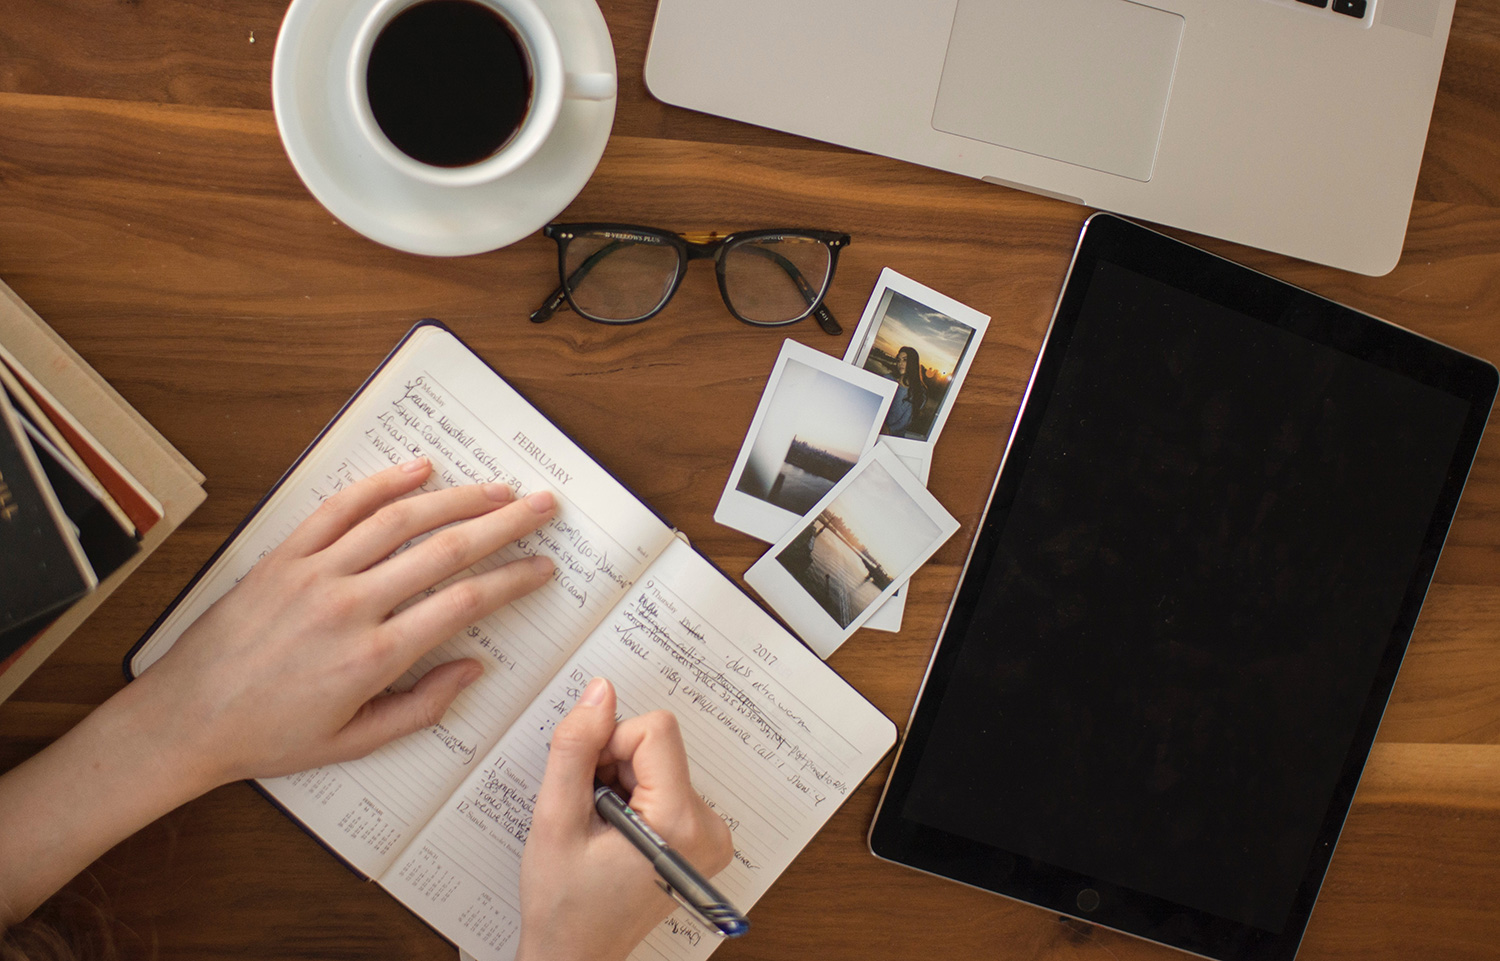 A person writes in a notebook on a desk strewn with photos, a notebook, a laptop, glasses, and a cup of coffee